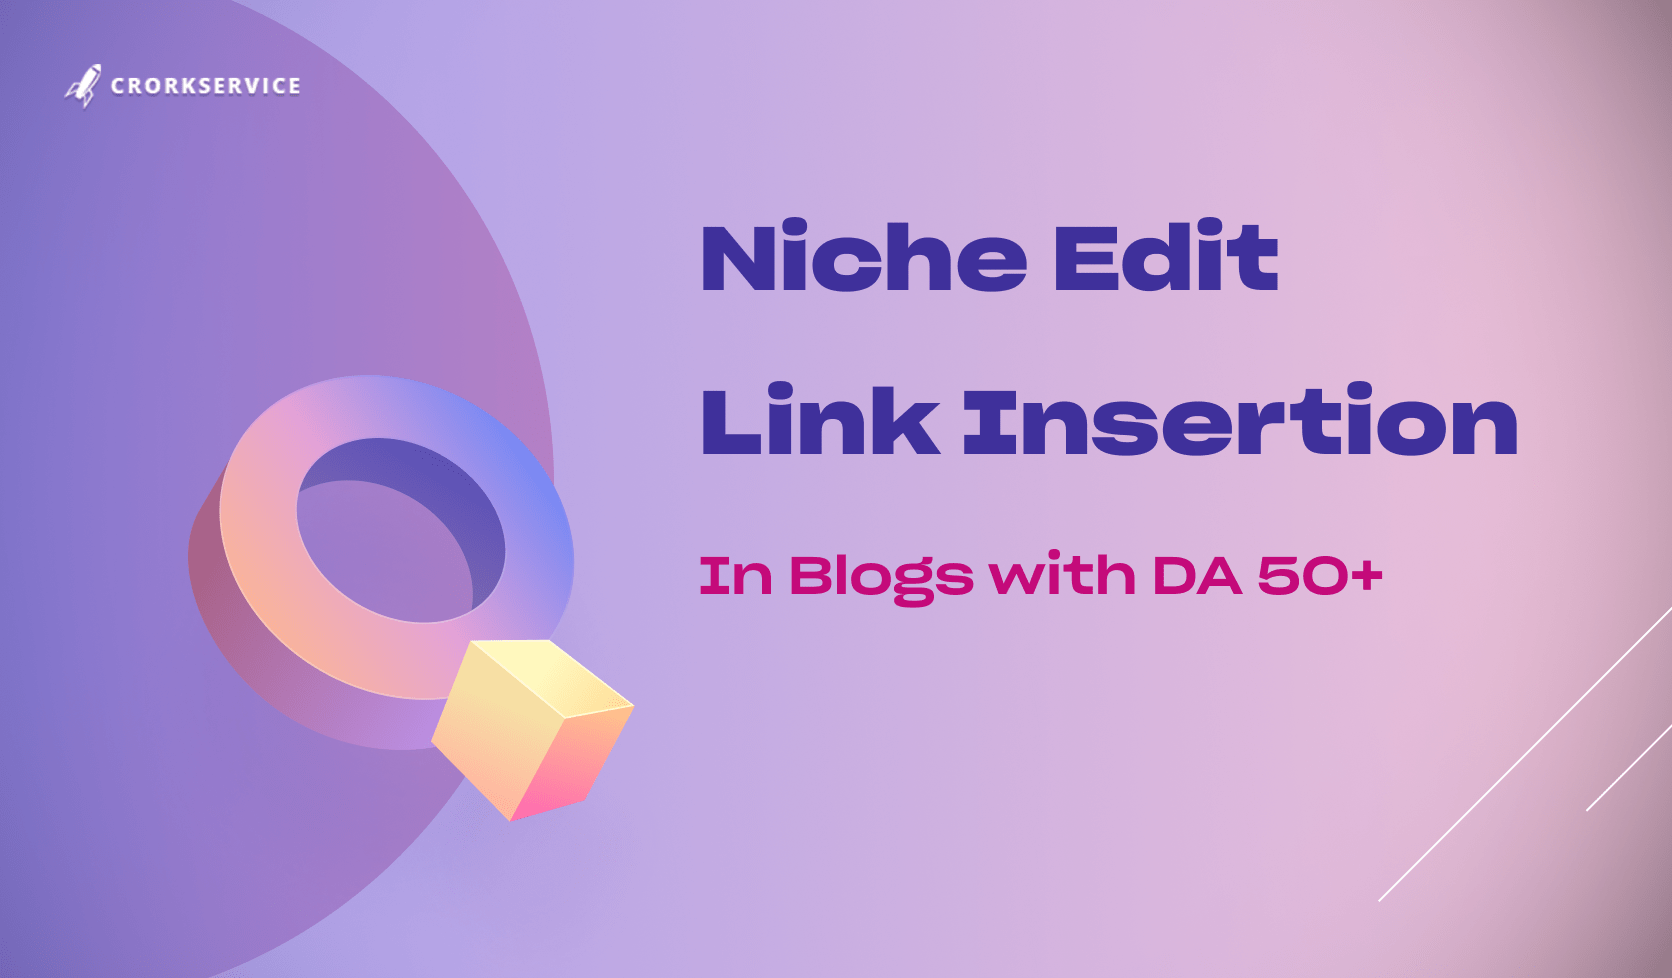 Niche Edit - Link Insertion in Blogs with DR from 30 to 50+